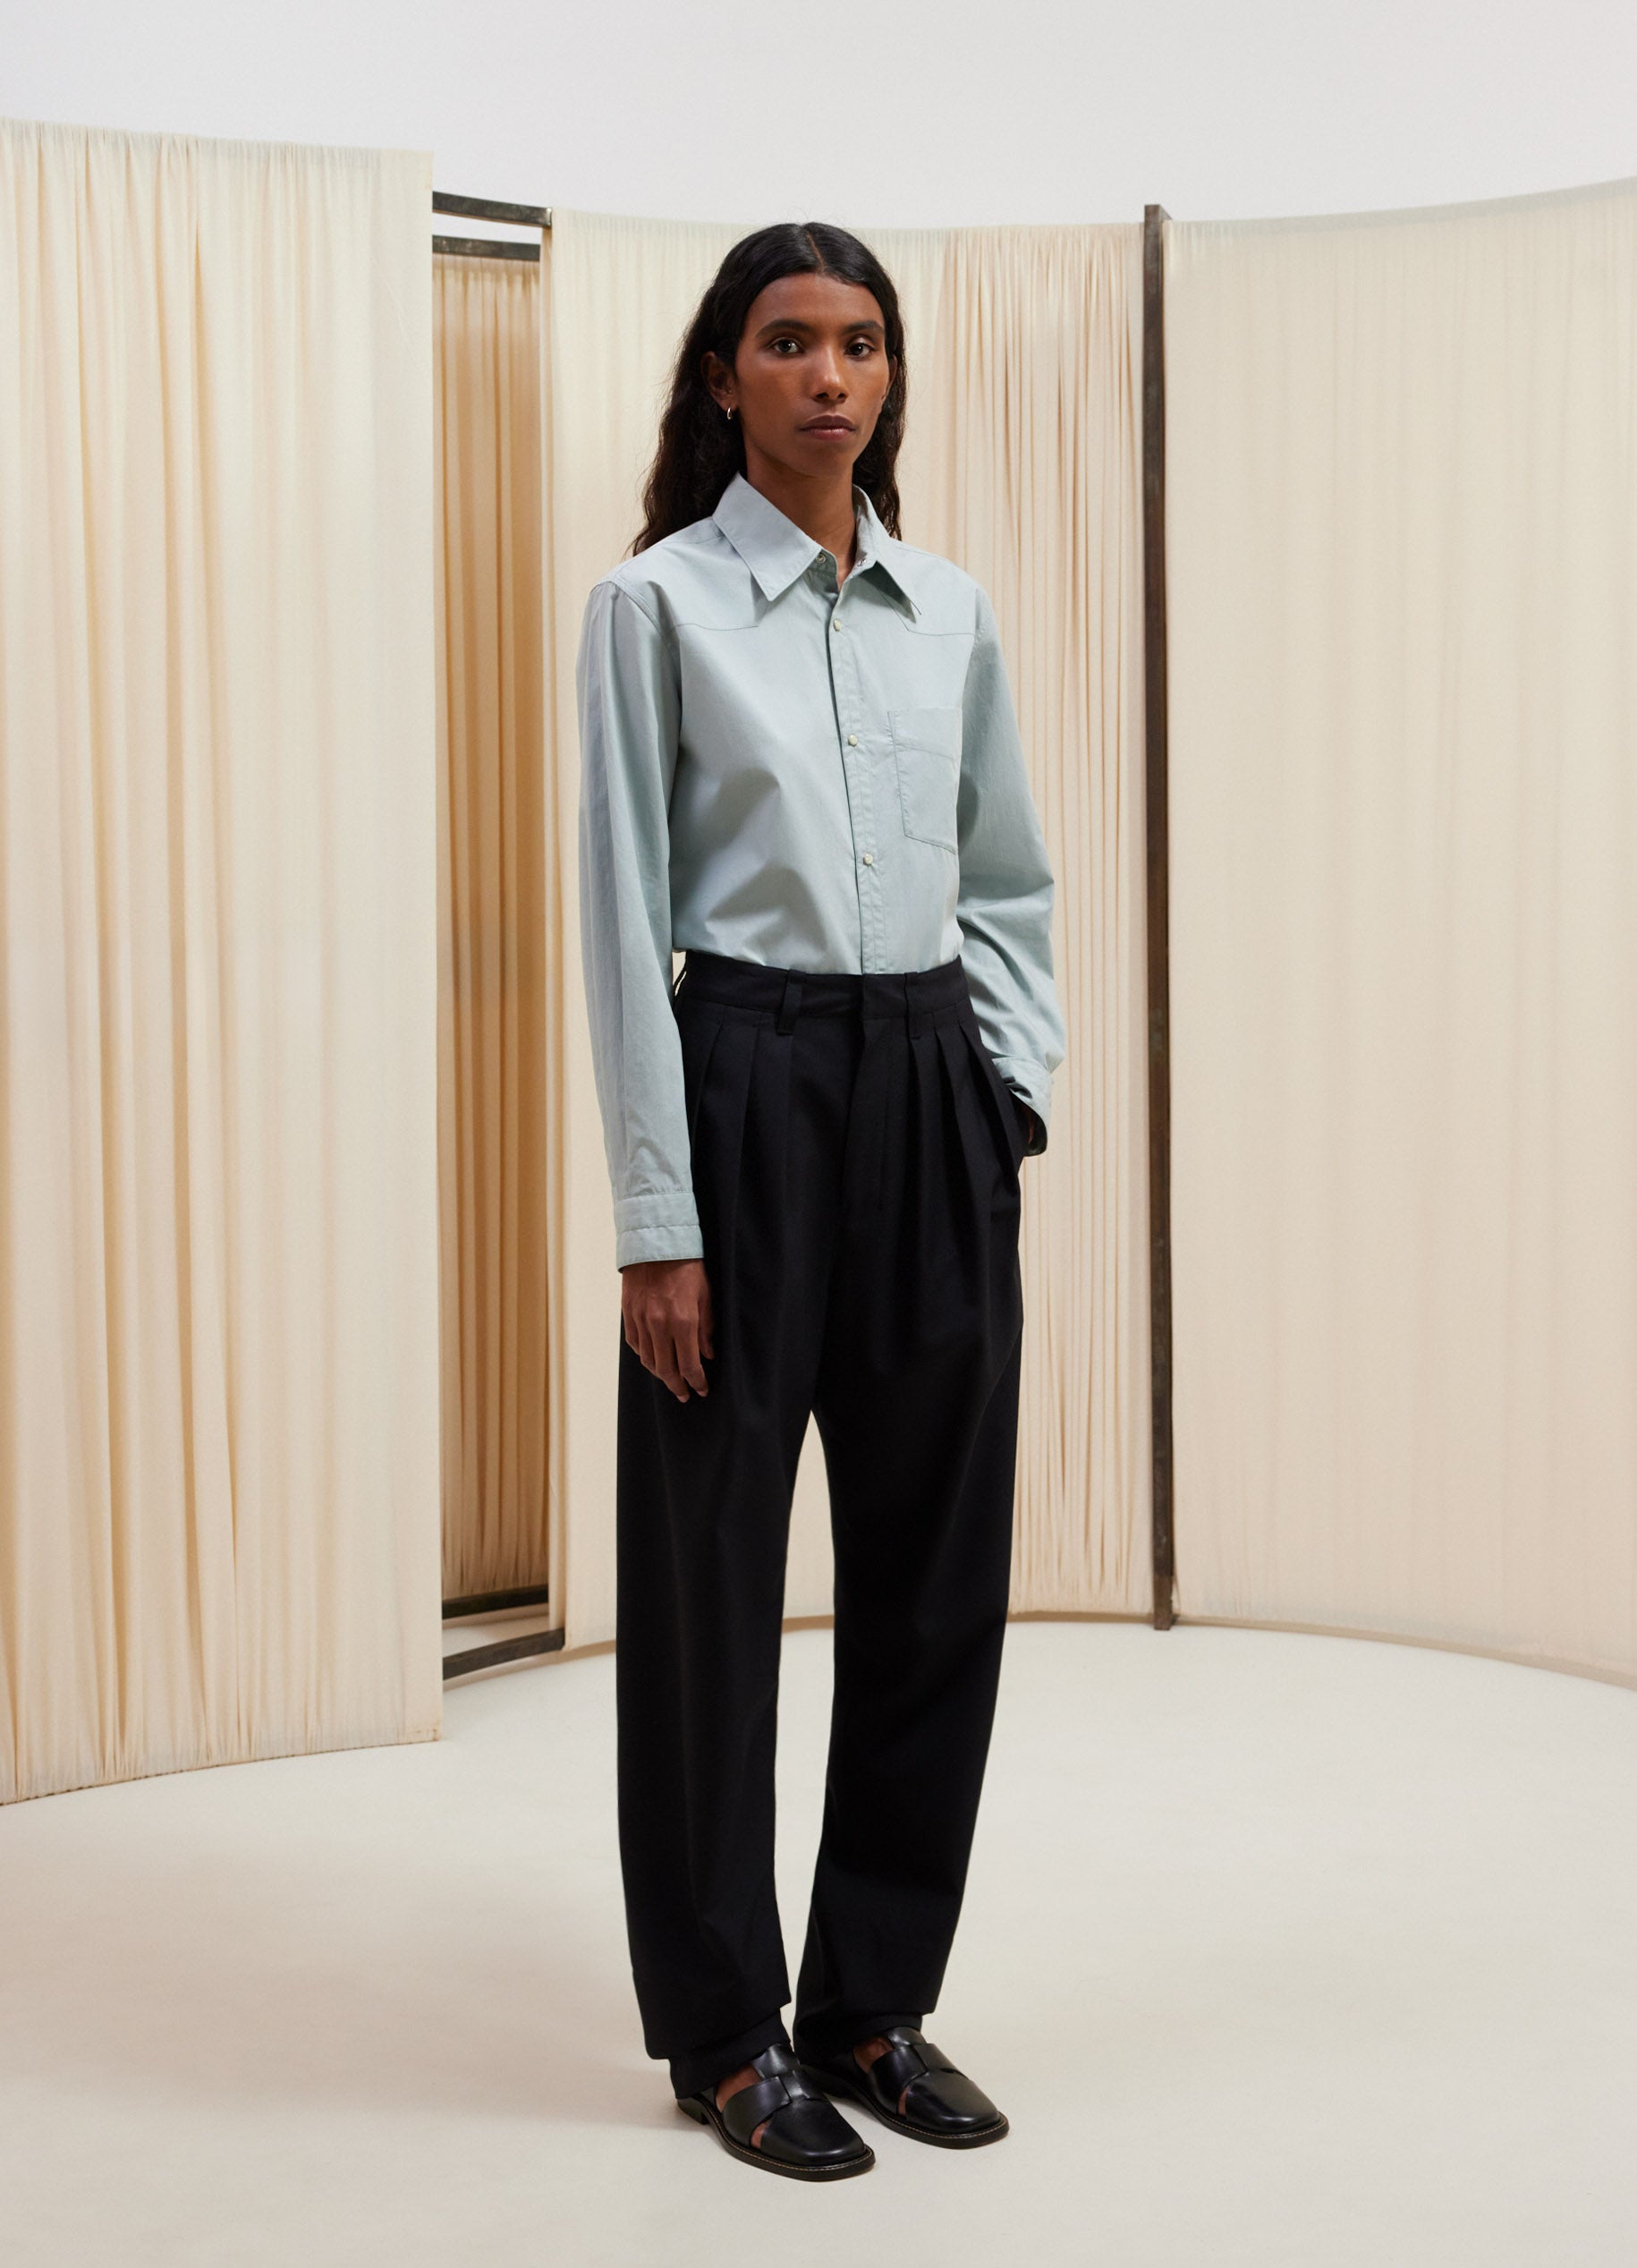 high-waisted pleated trousers, LEMAIRE